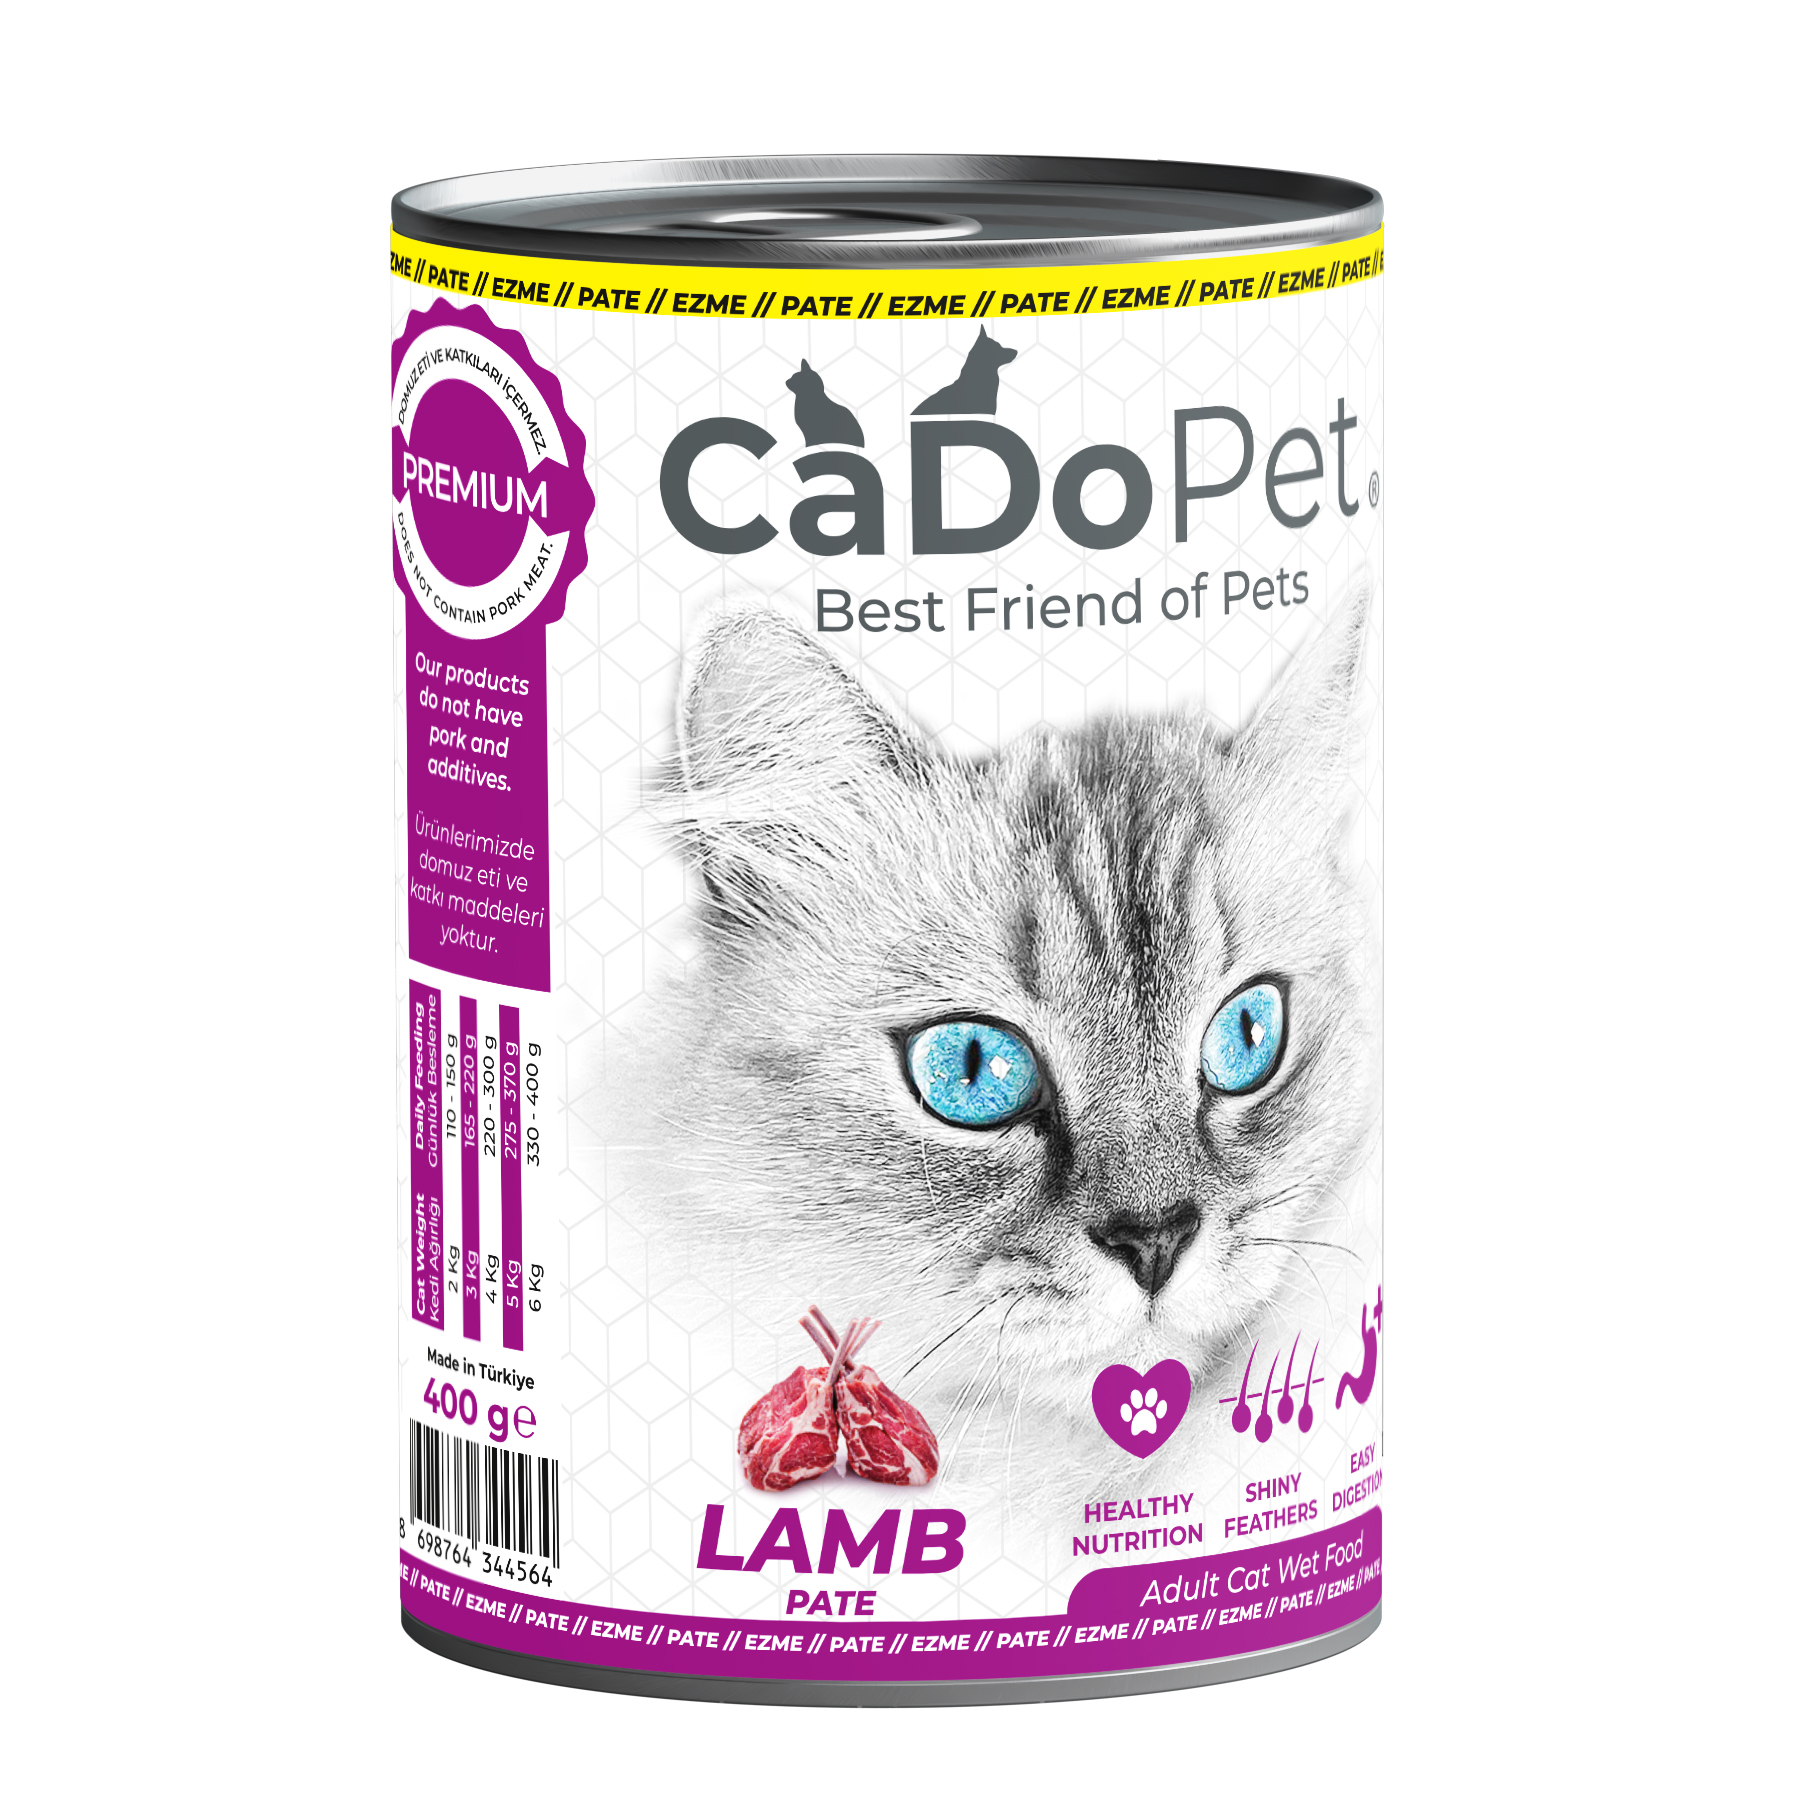 .Cat Wet Food 400g with Lamb Pate.